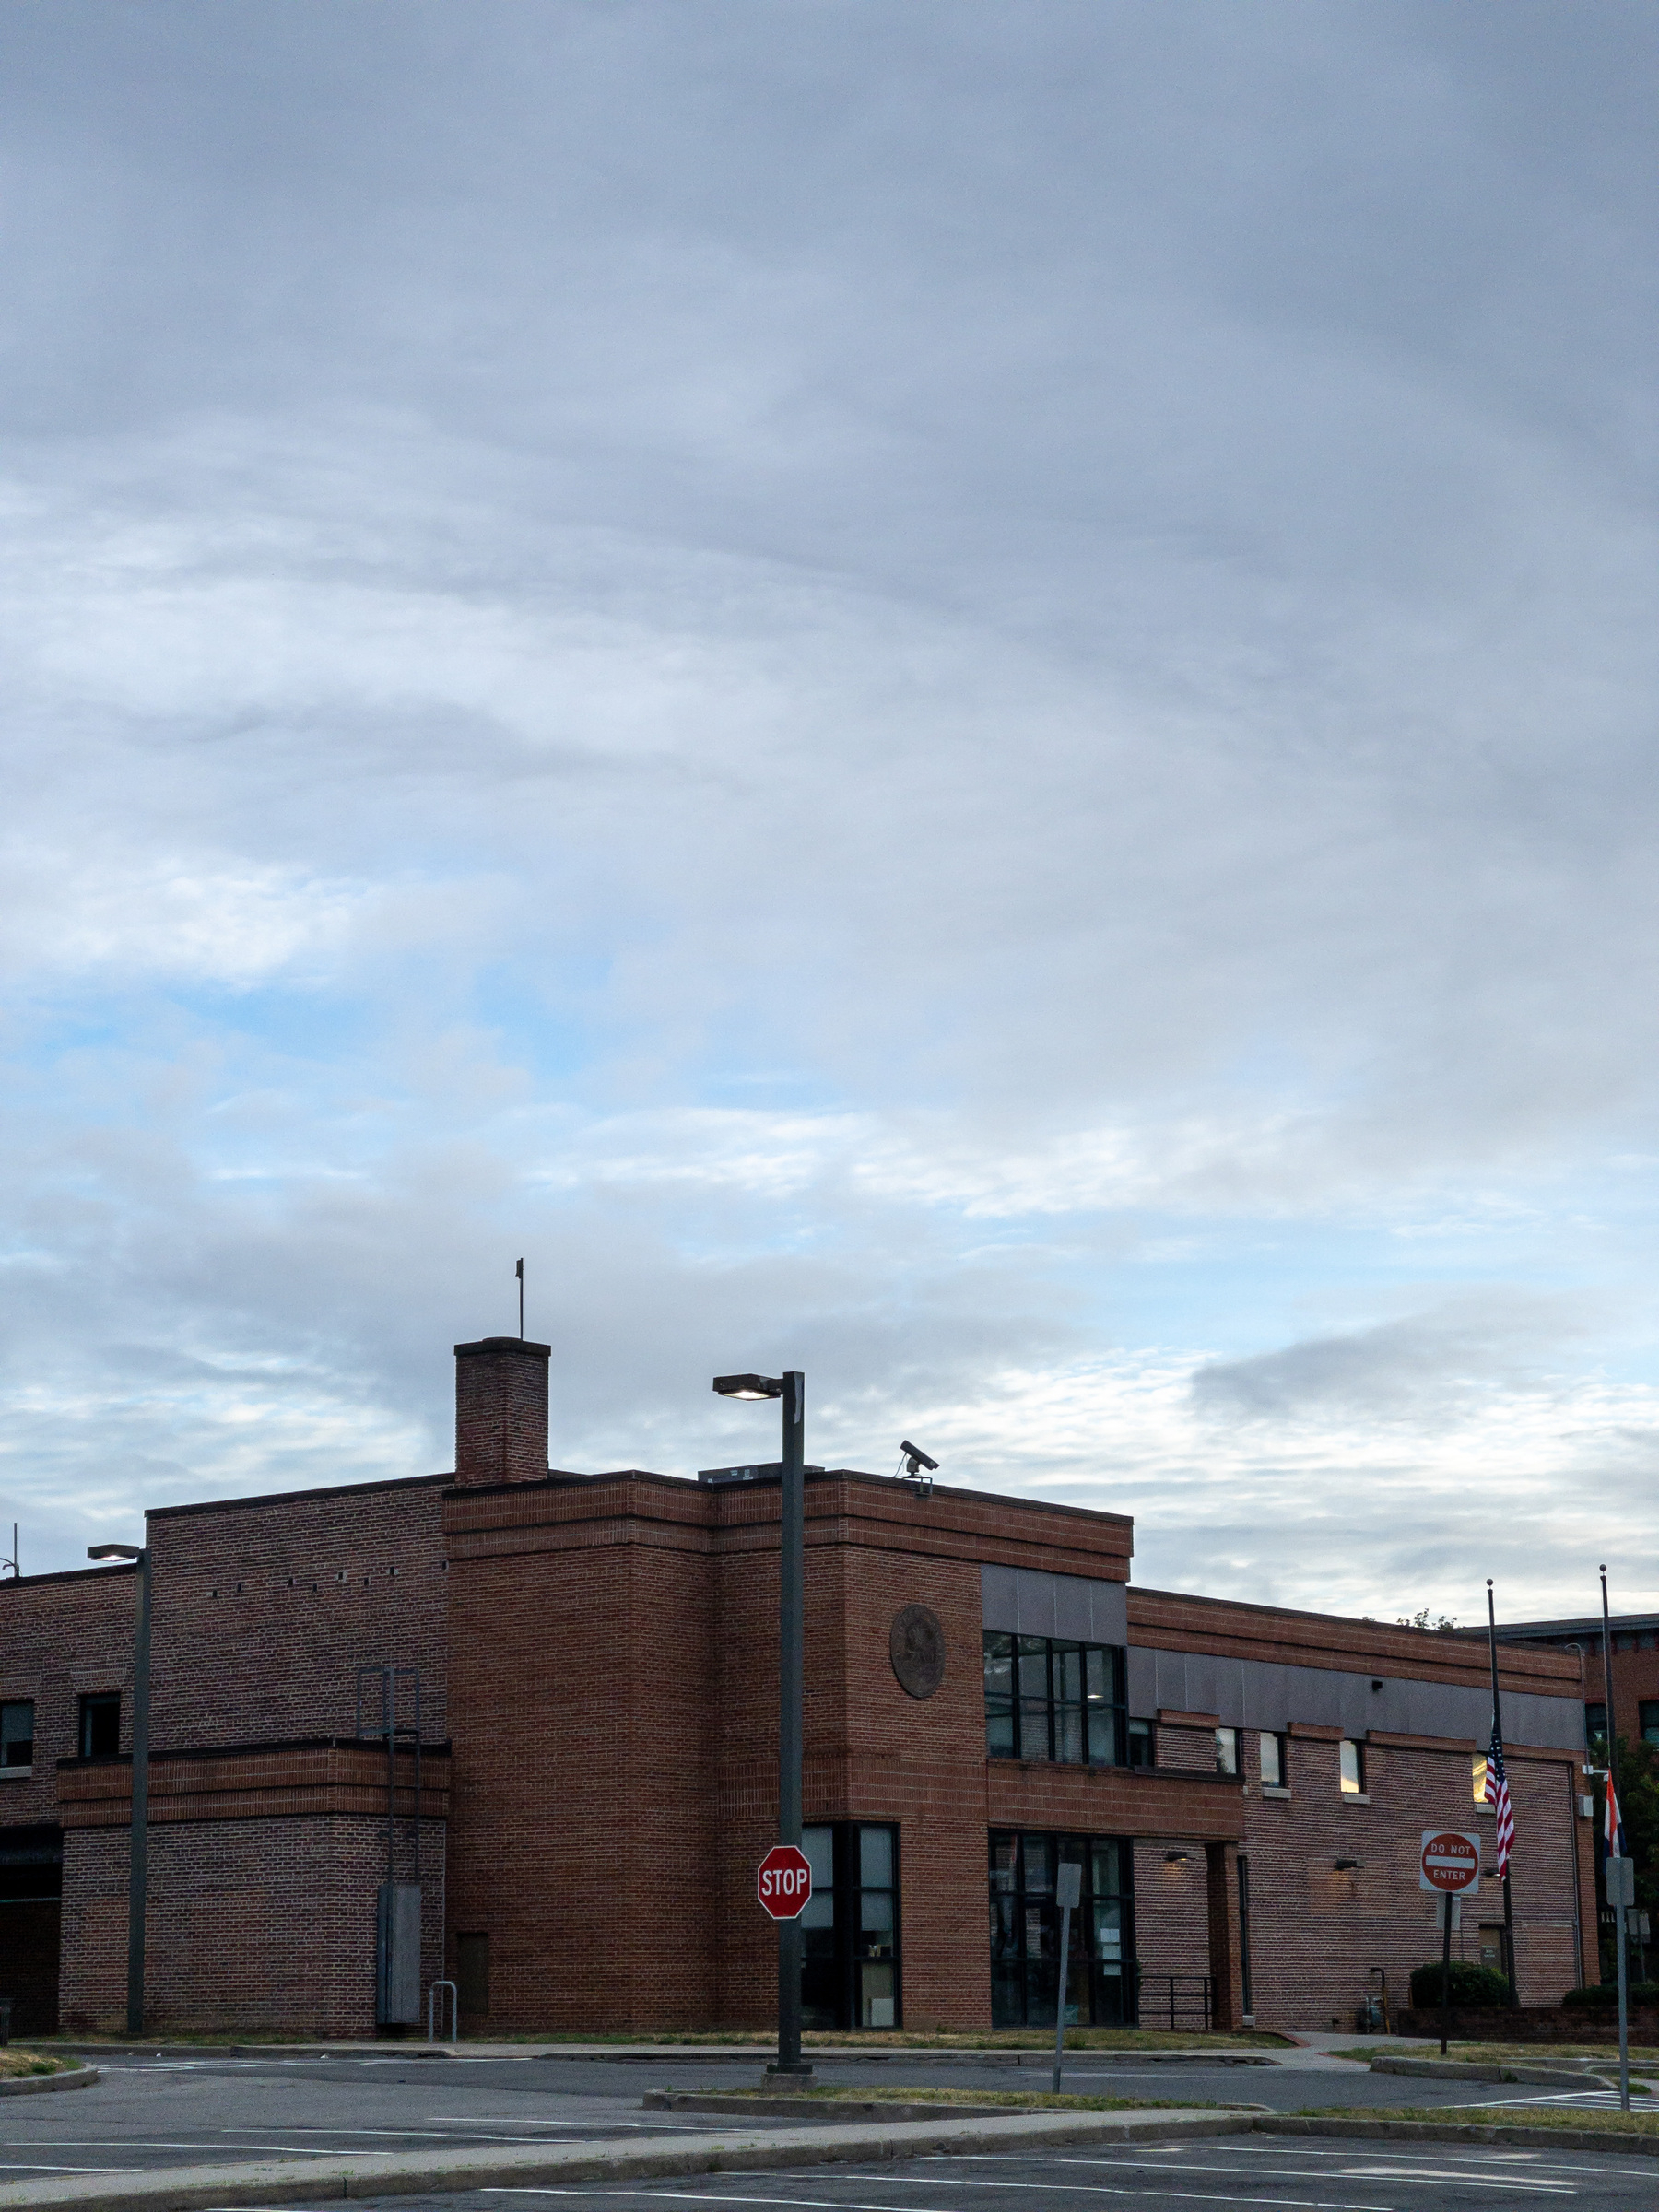 Morning partly cloudy sky over brick building.